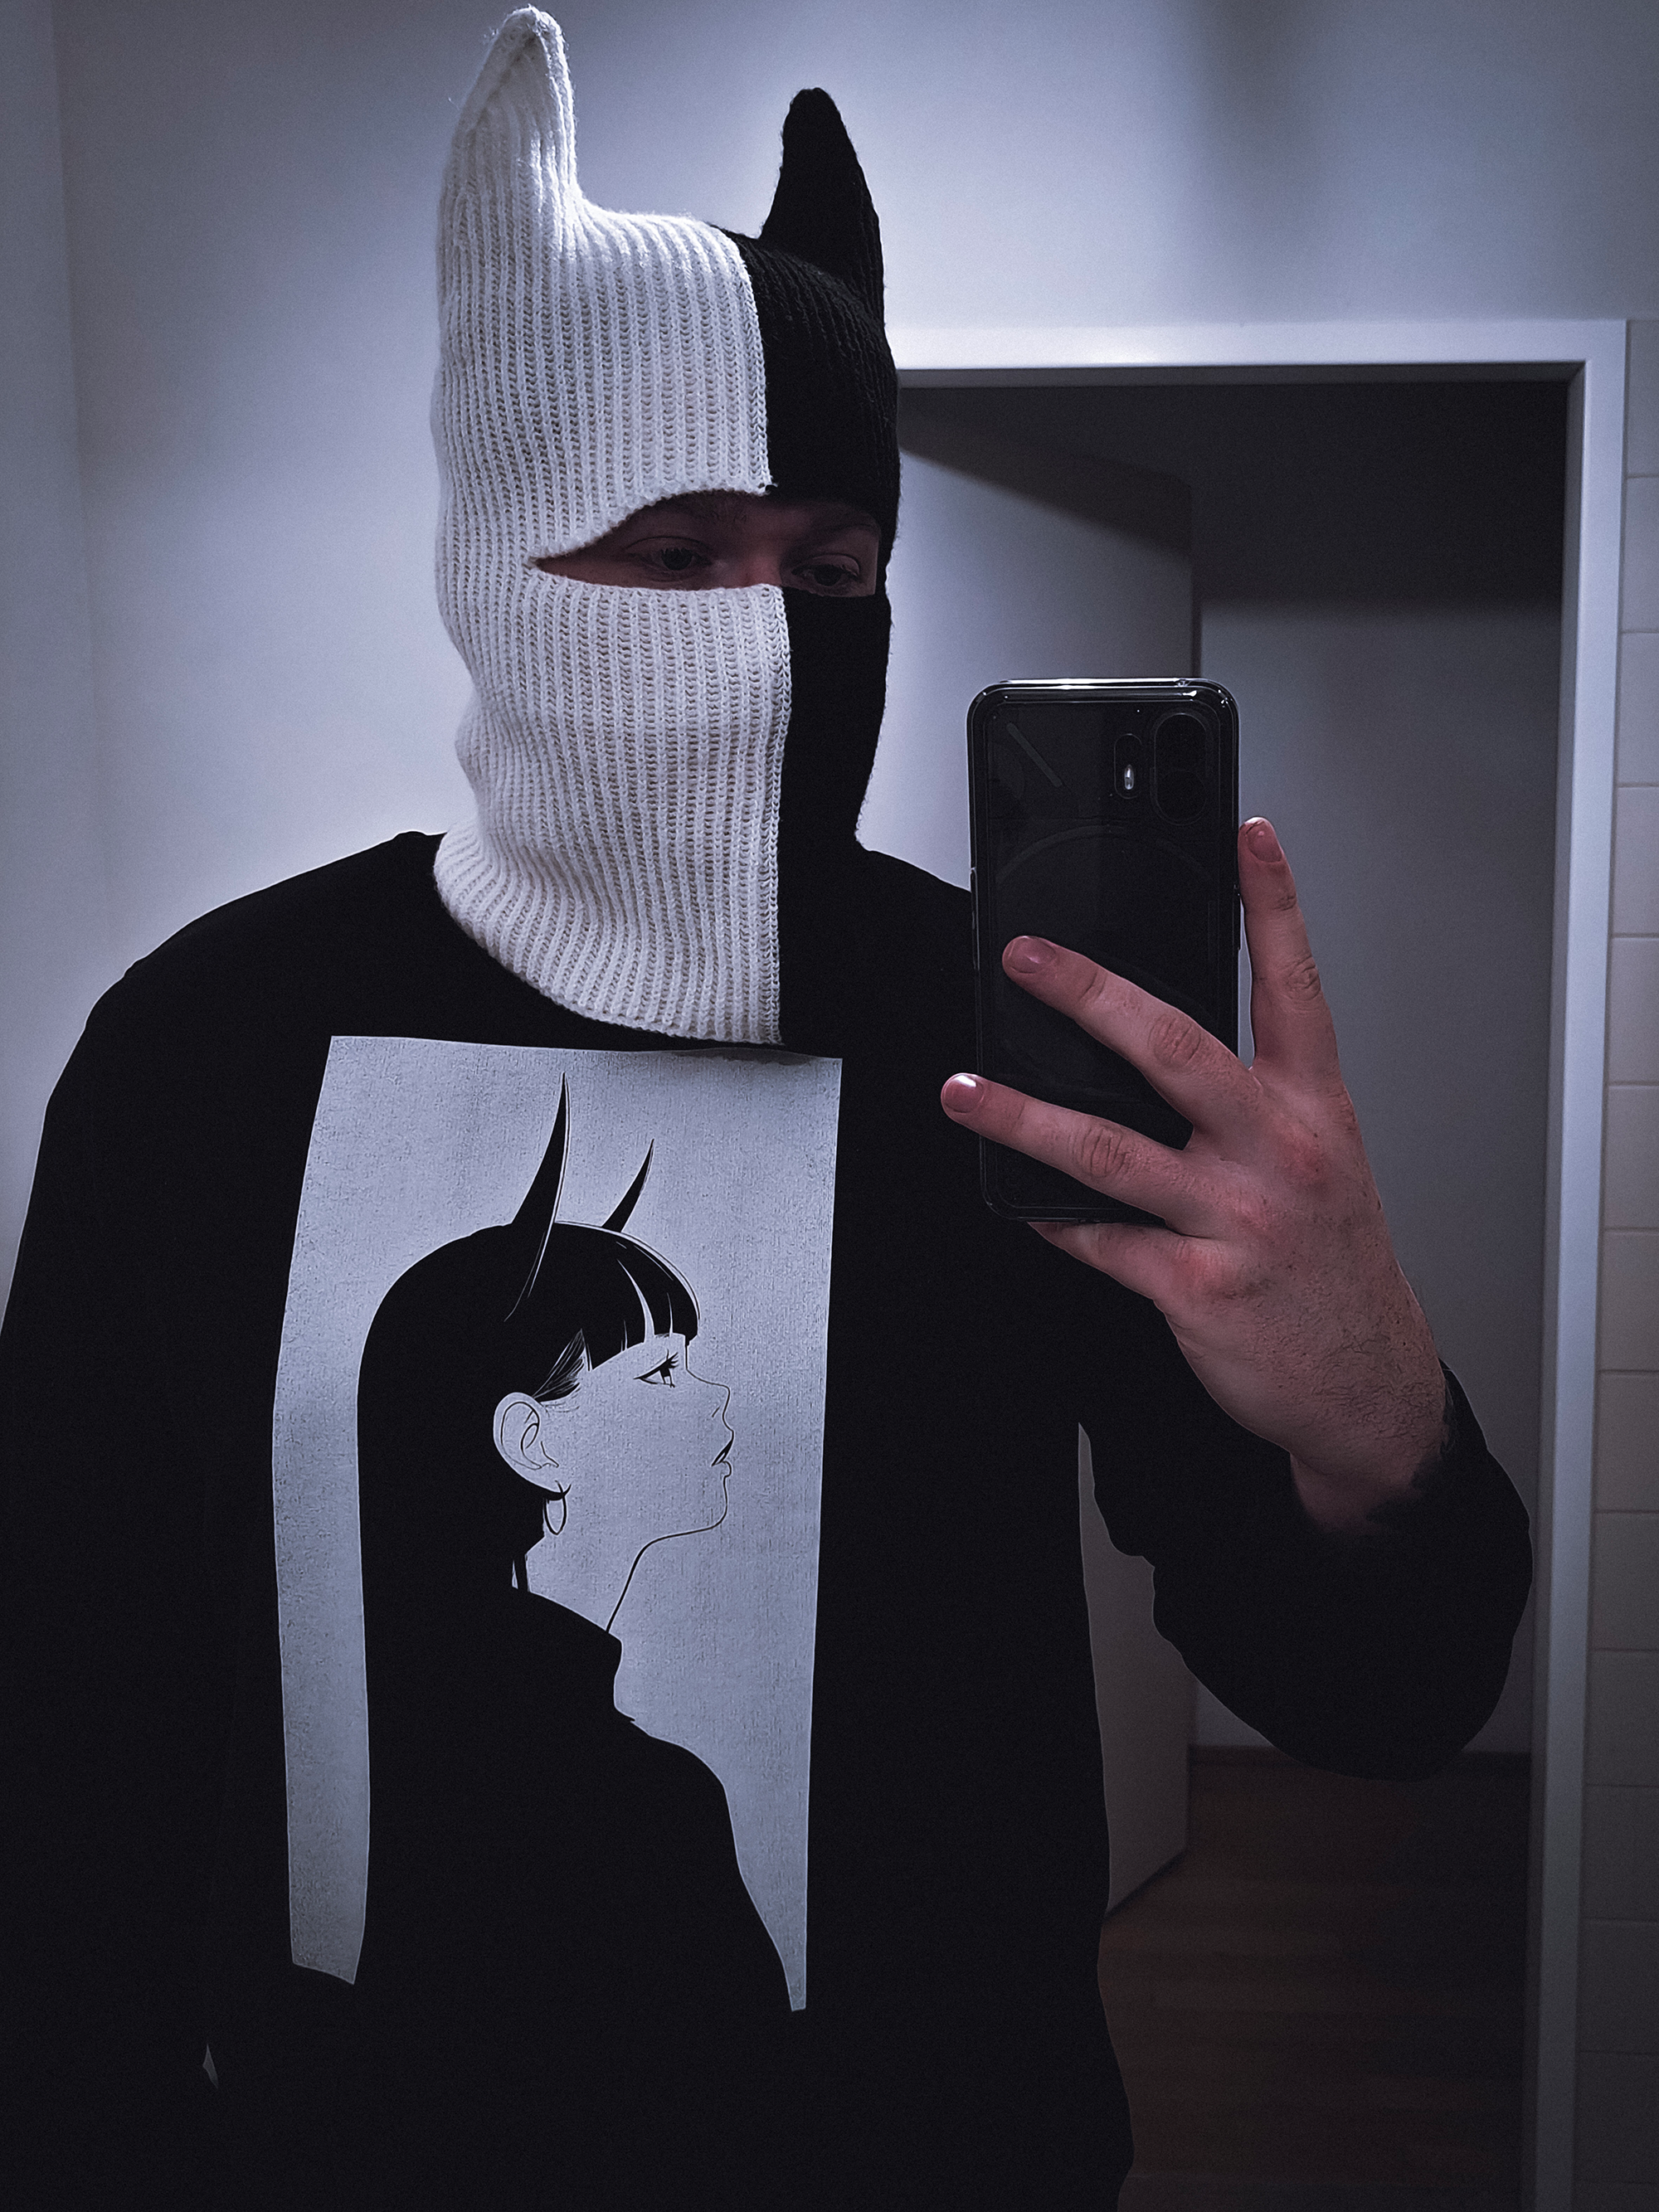 Person wearing a black sweatshirt featuring a minimalist anime design of a girl with long hair and horns, and a black and white knitted mask with pointed ears, taking a selfie in a mirror.